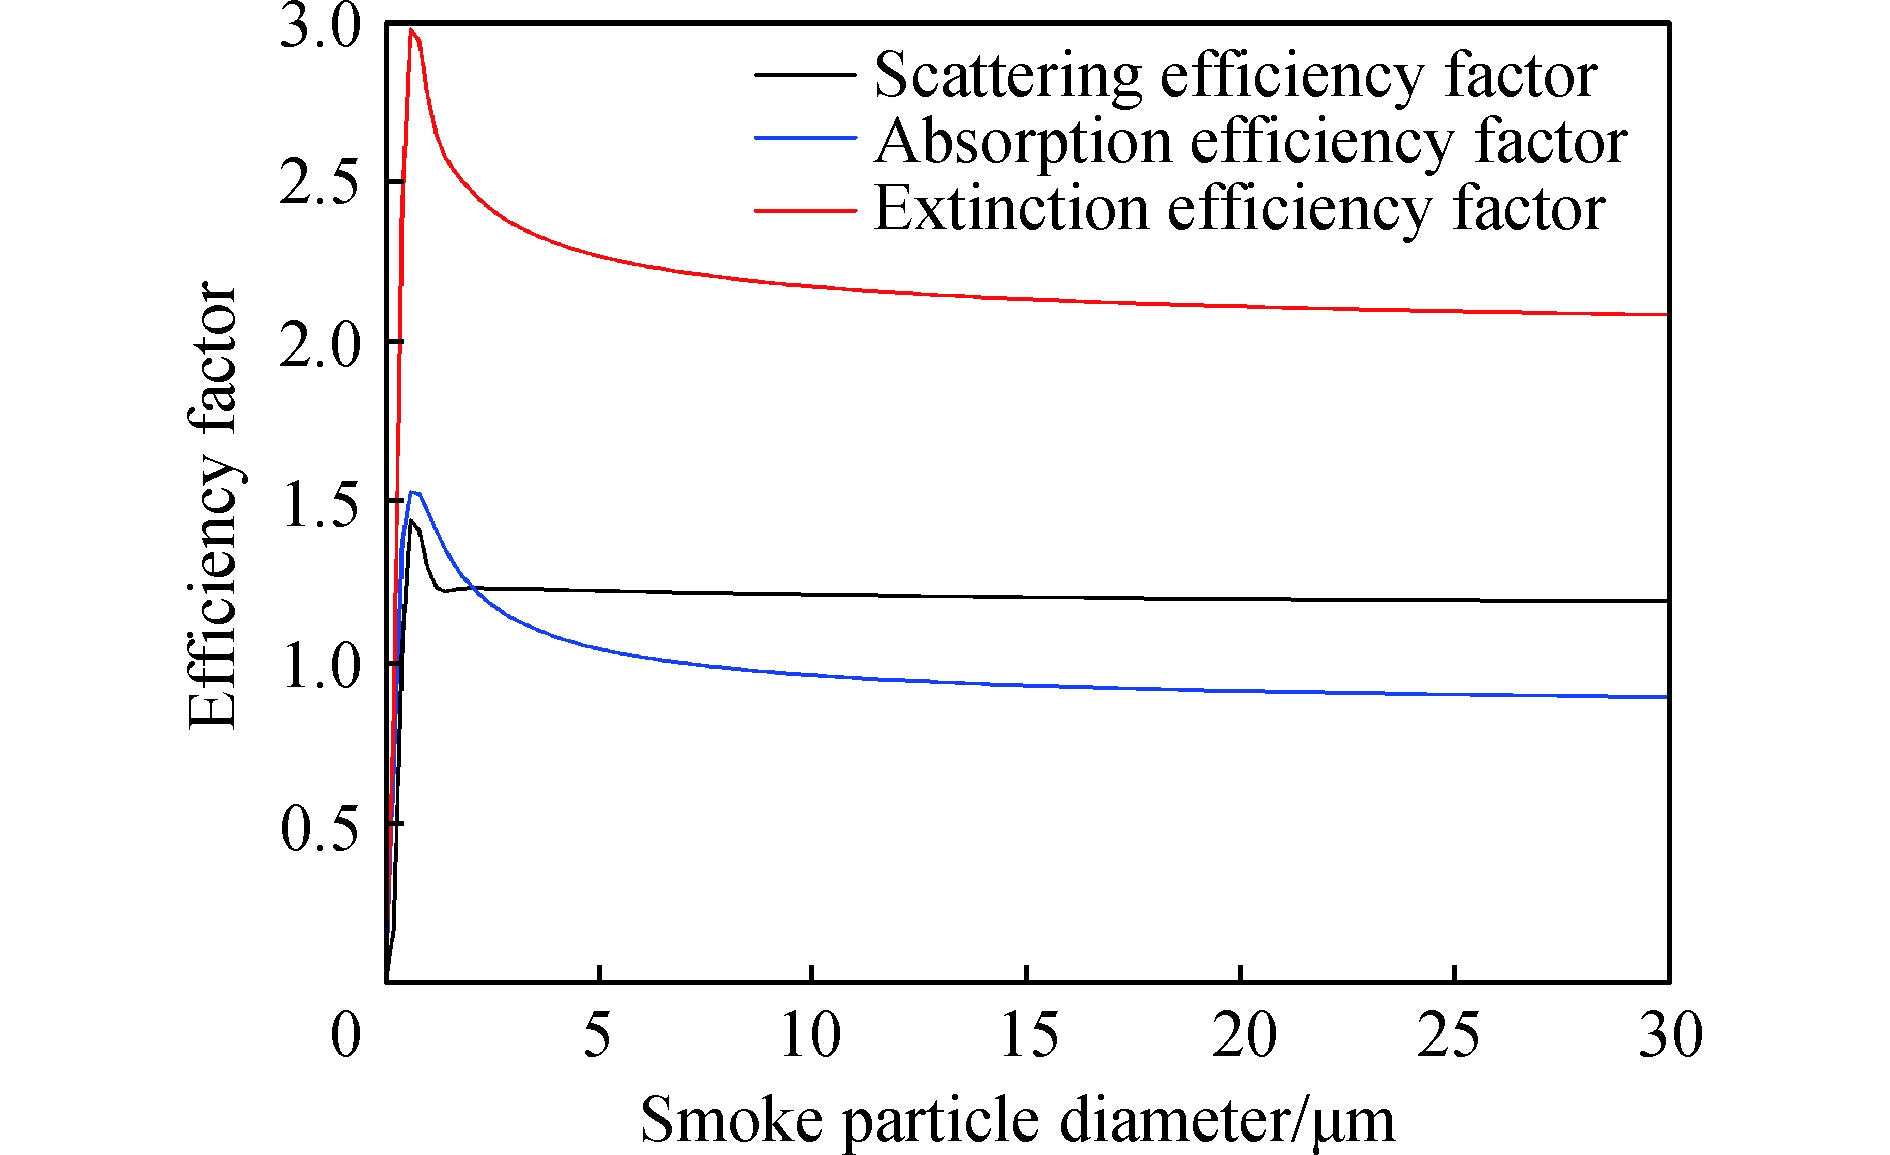 Efficiency factor curves of smoke particles at the wavelength of 905 nm